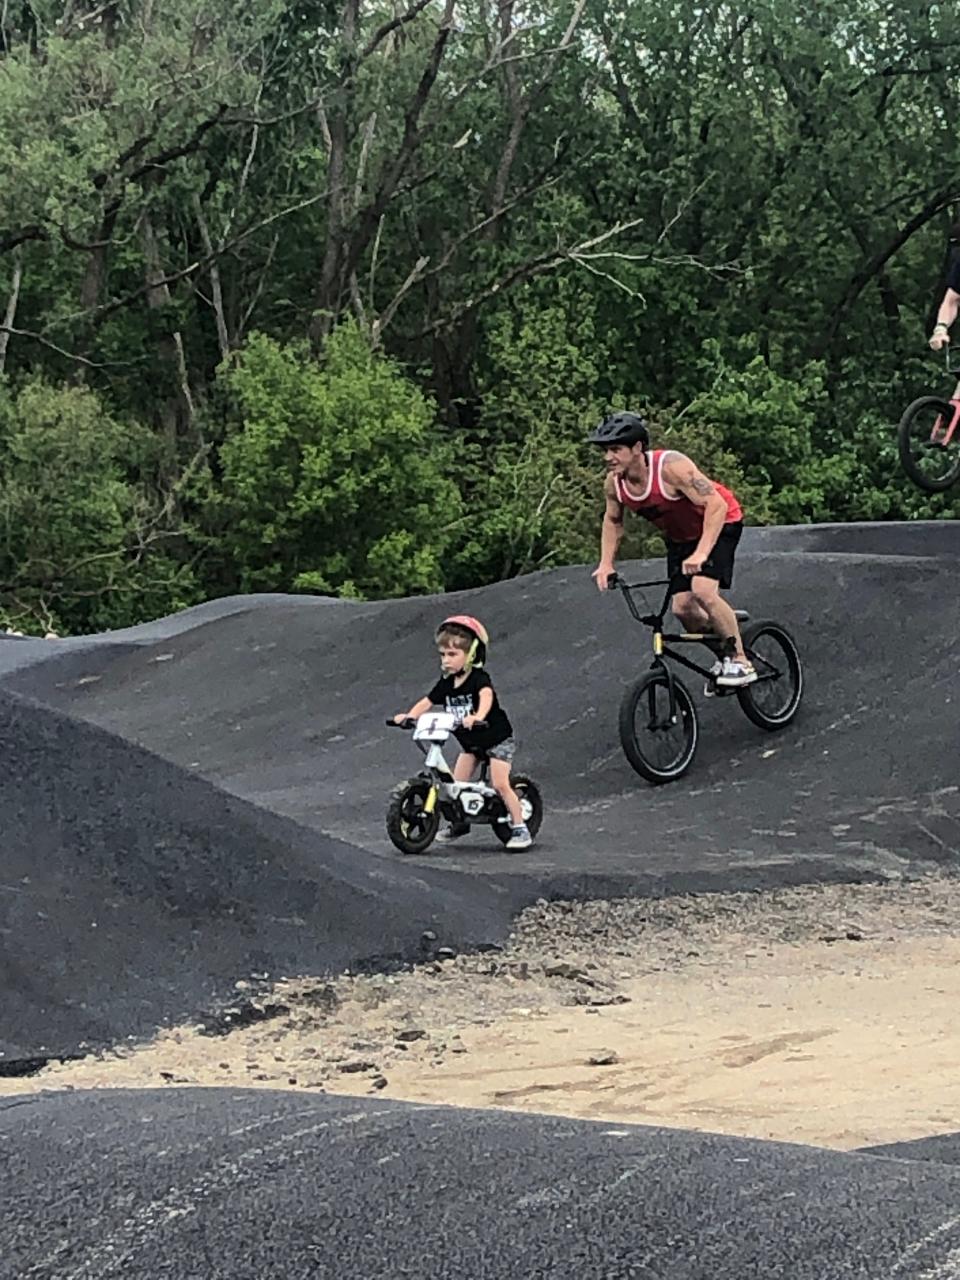 Chad Christian, 38 of Sebring, and his 3-year-old son ride bikes on the new pump track at Memorial Park in Alliance.